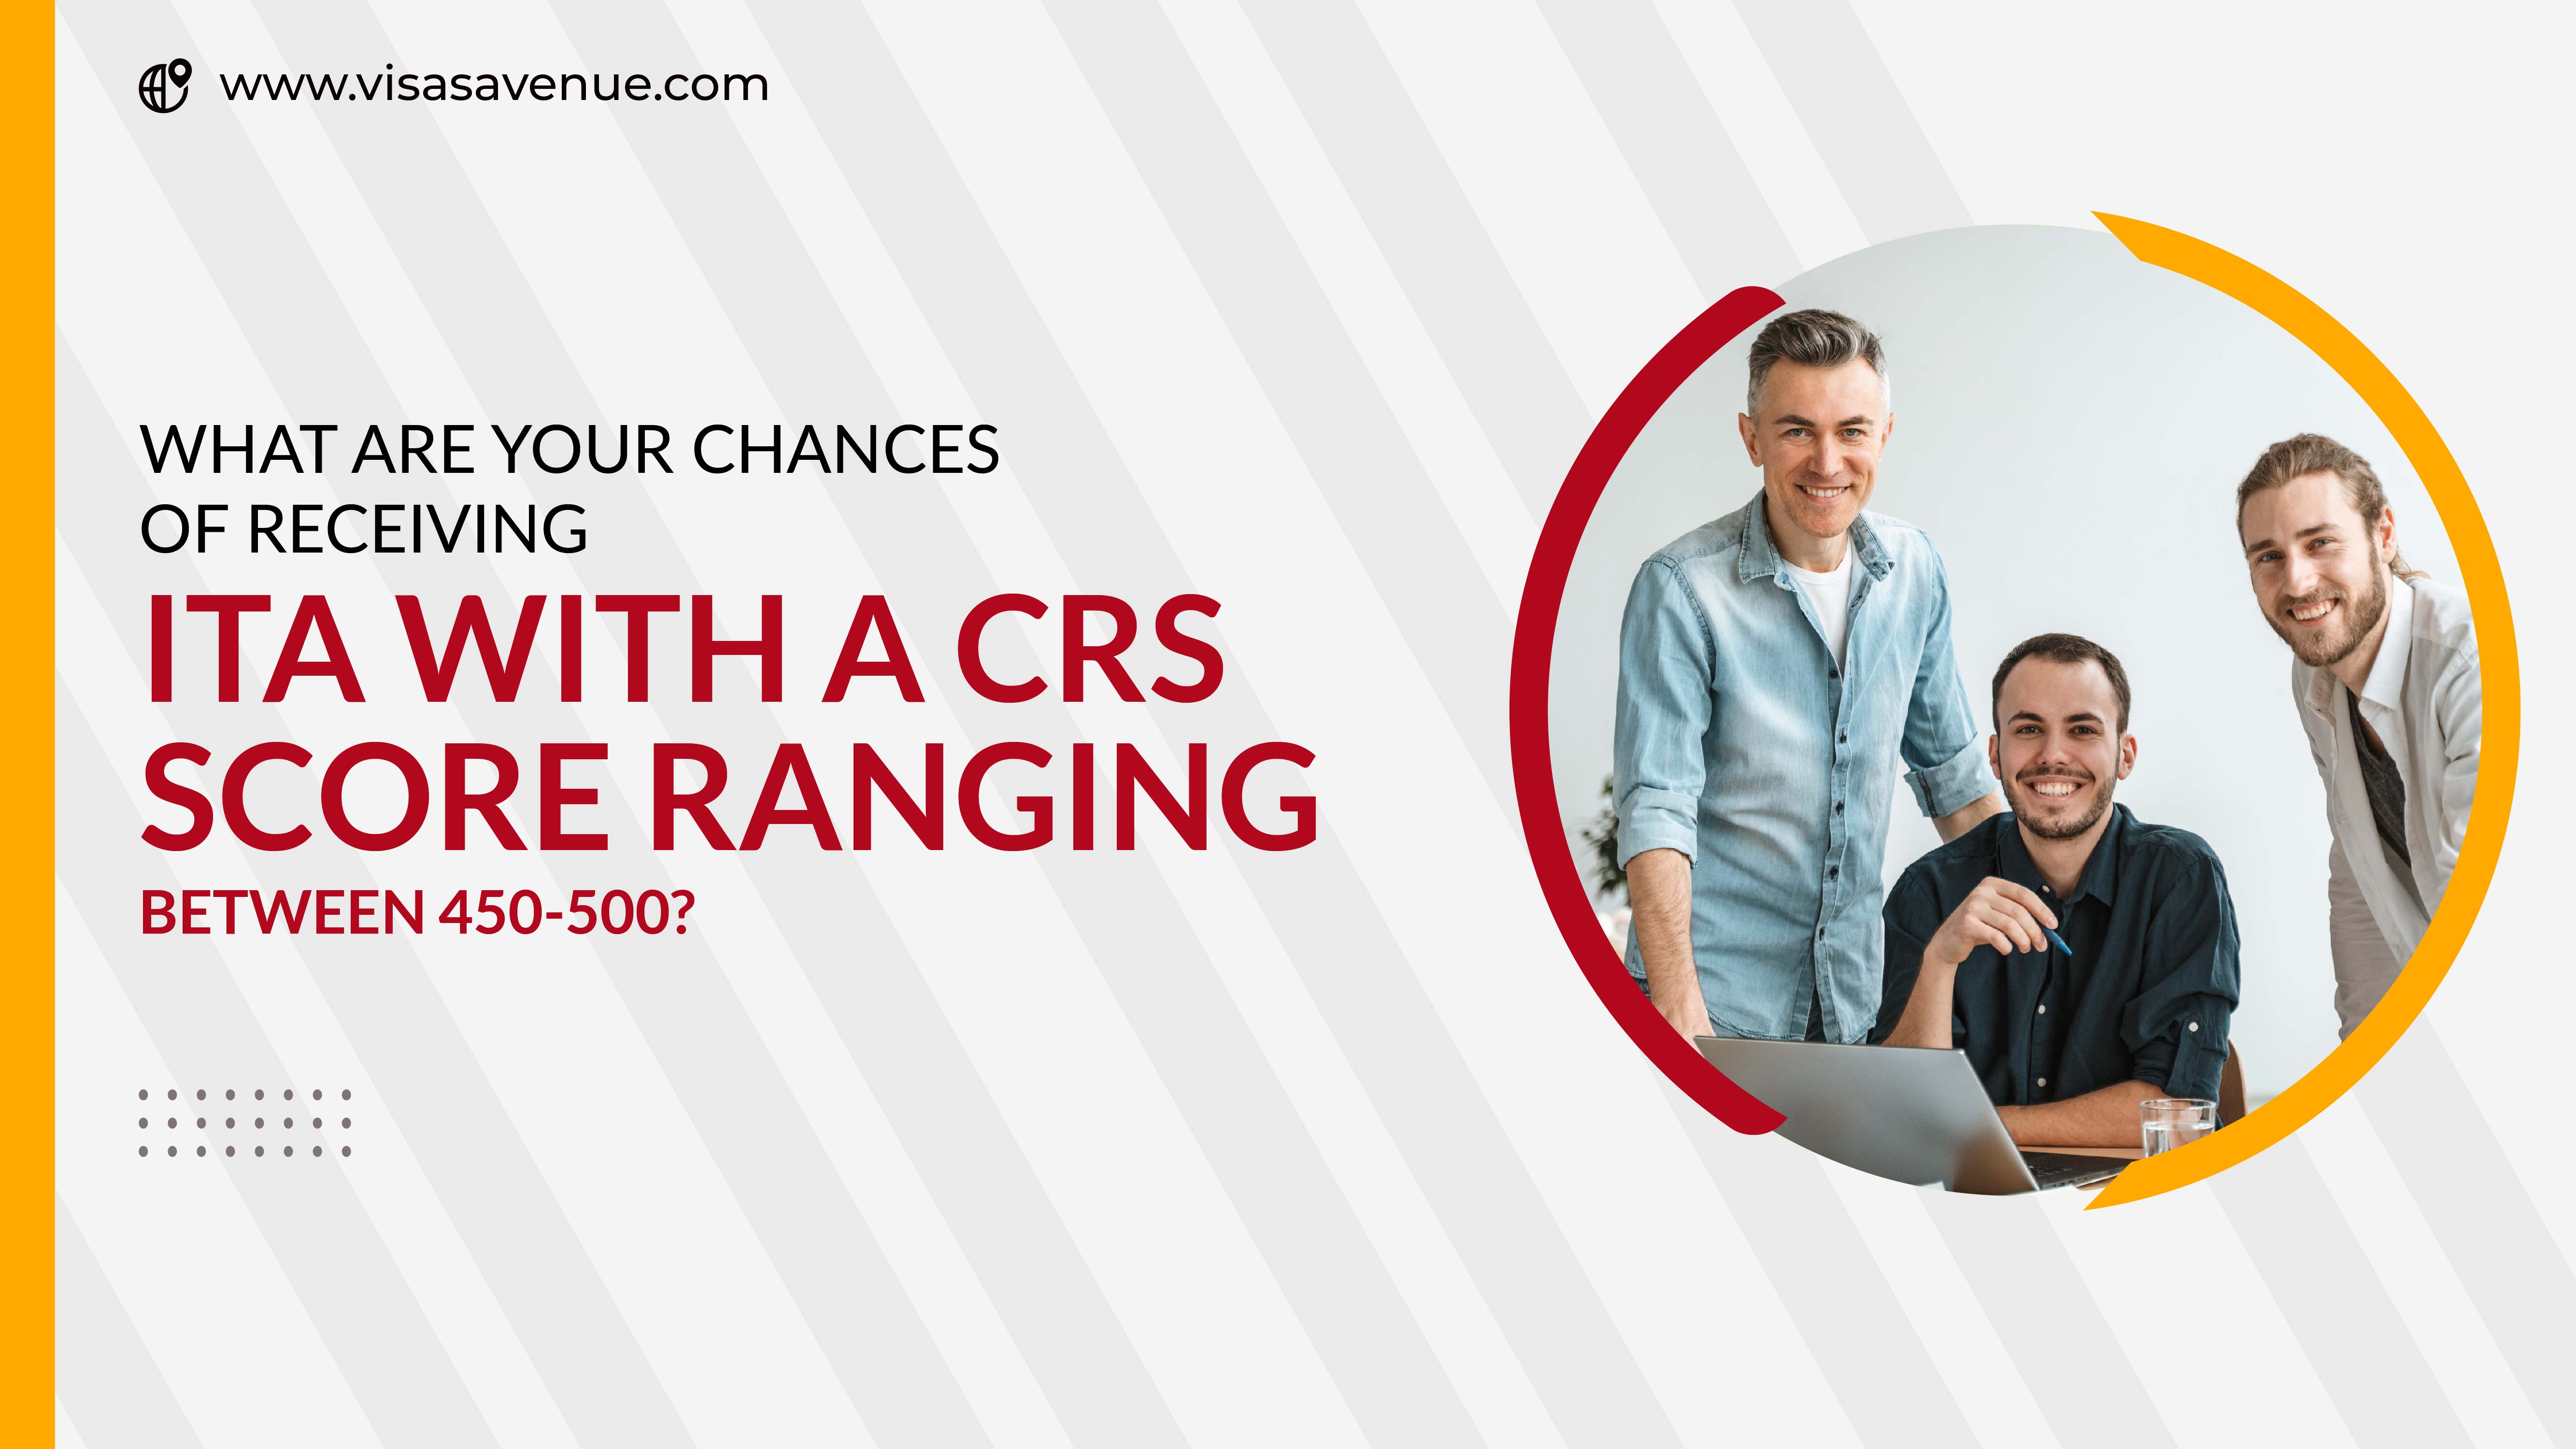 What are your chances of receiving ITA with a CRS score ranging between 450-500?